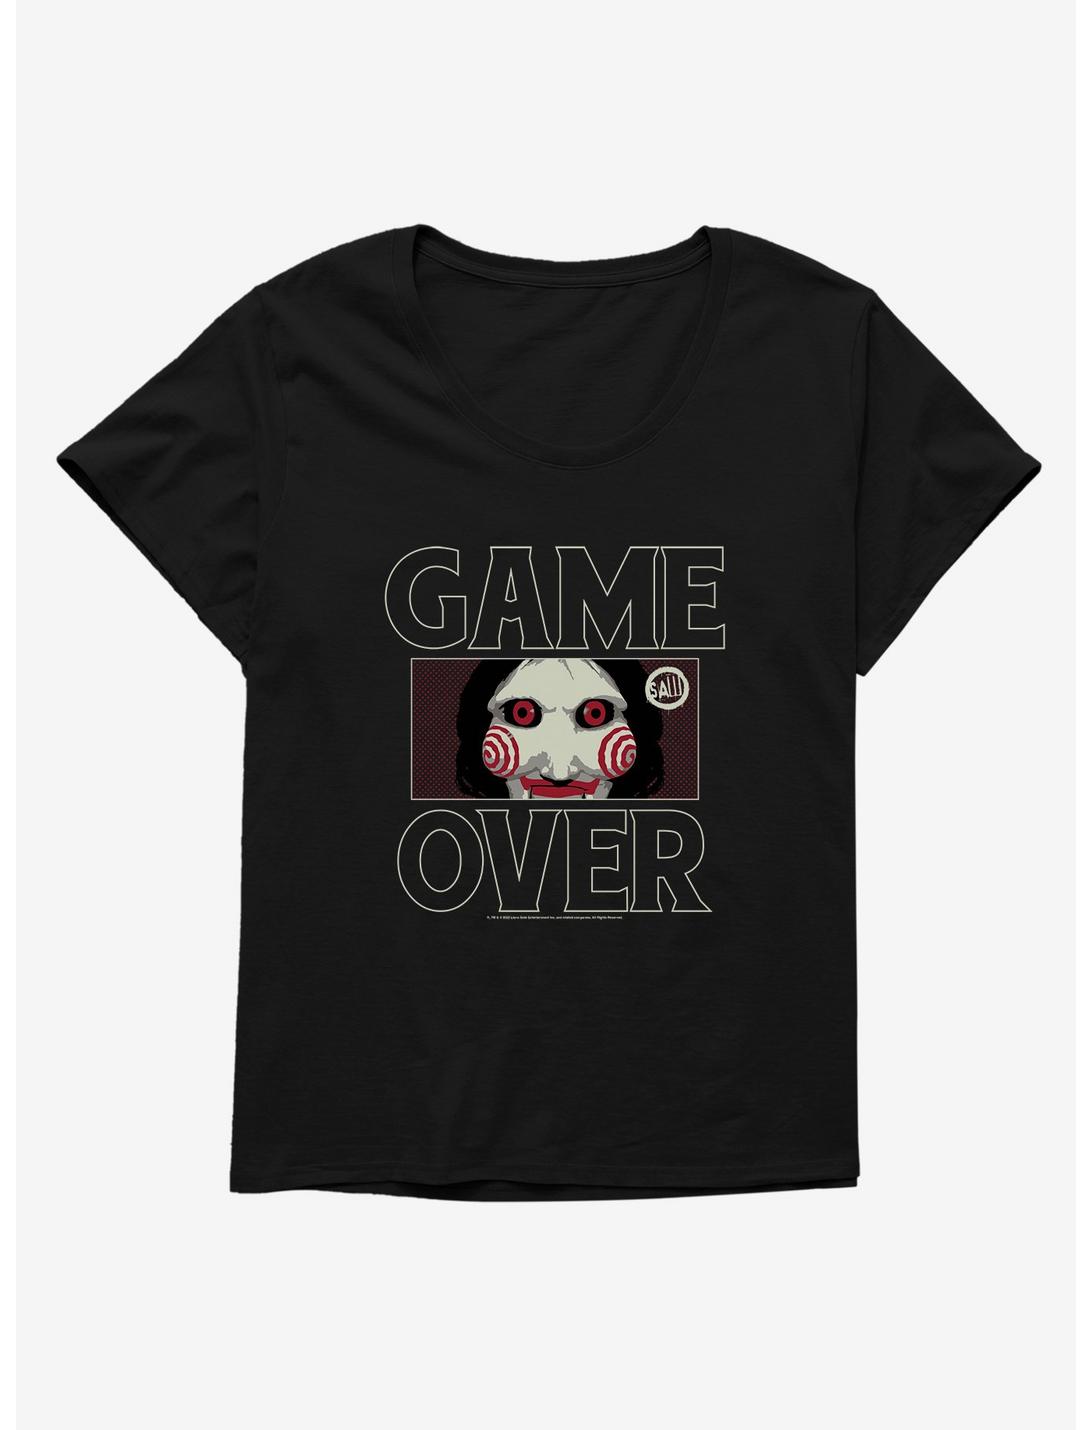 Saw Game Over Girls T-Shirt Plus Size, BLACK, hi-res